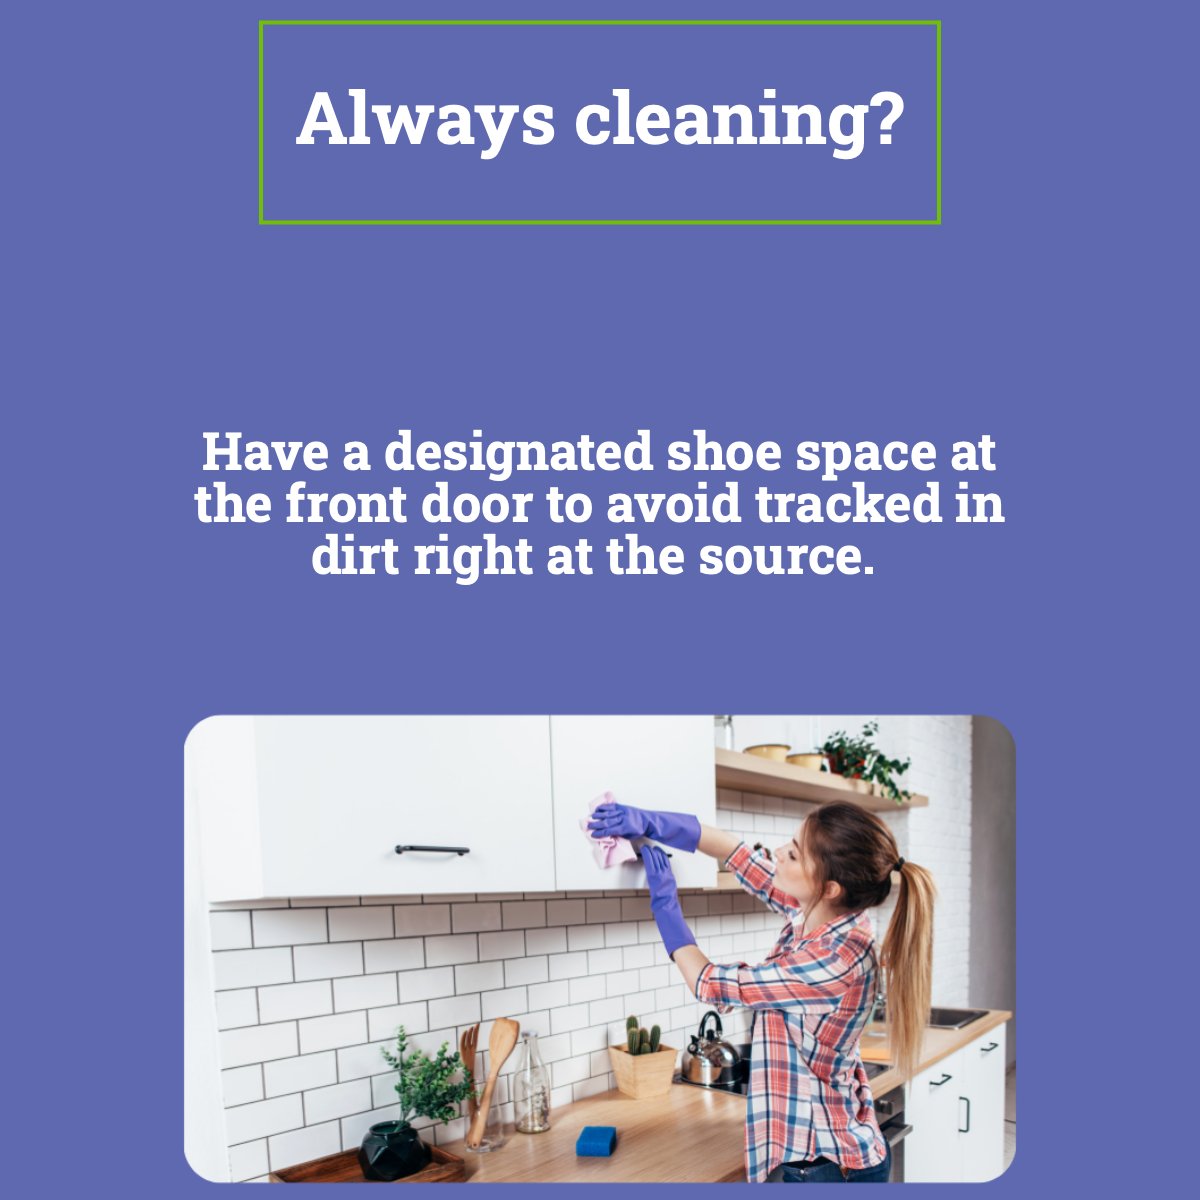 If you are tired of cleaning all the time, try this tip! 💡

#cleaningtips #cleanhouse #cleaninghacks #cleanhome
 #YourPerfectHome #CRayBrower #SanJoaquinCounty #StocktonCA #RealEstate